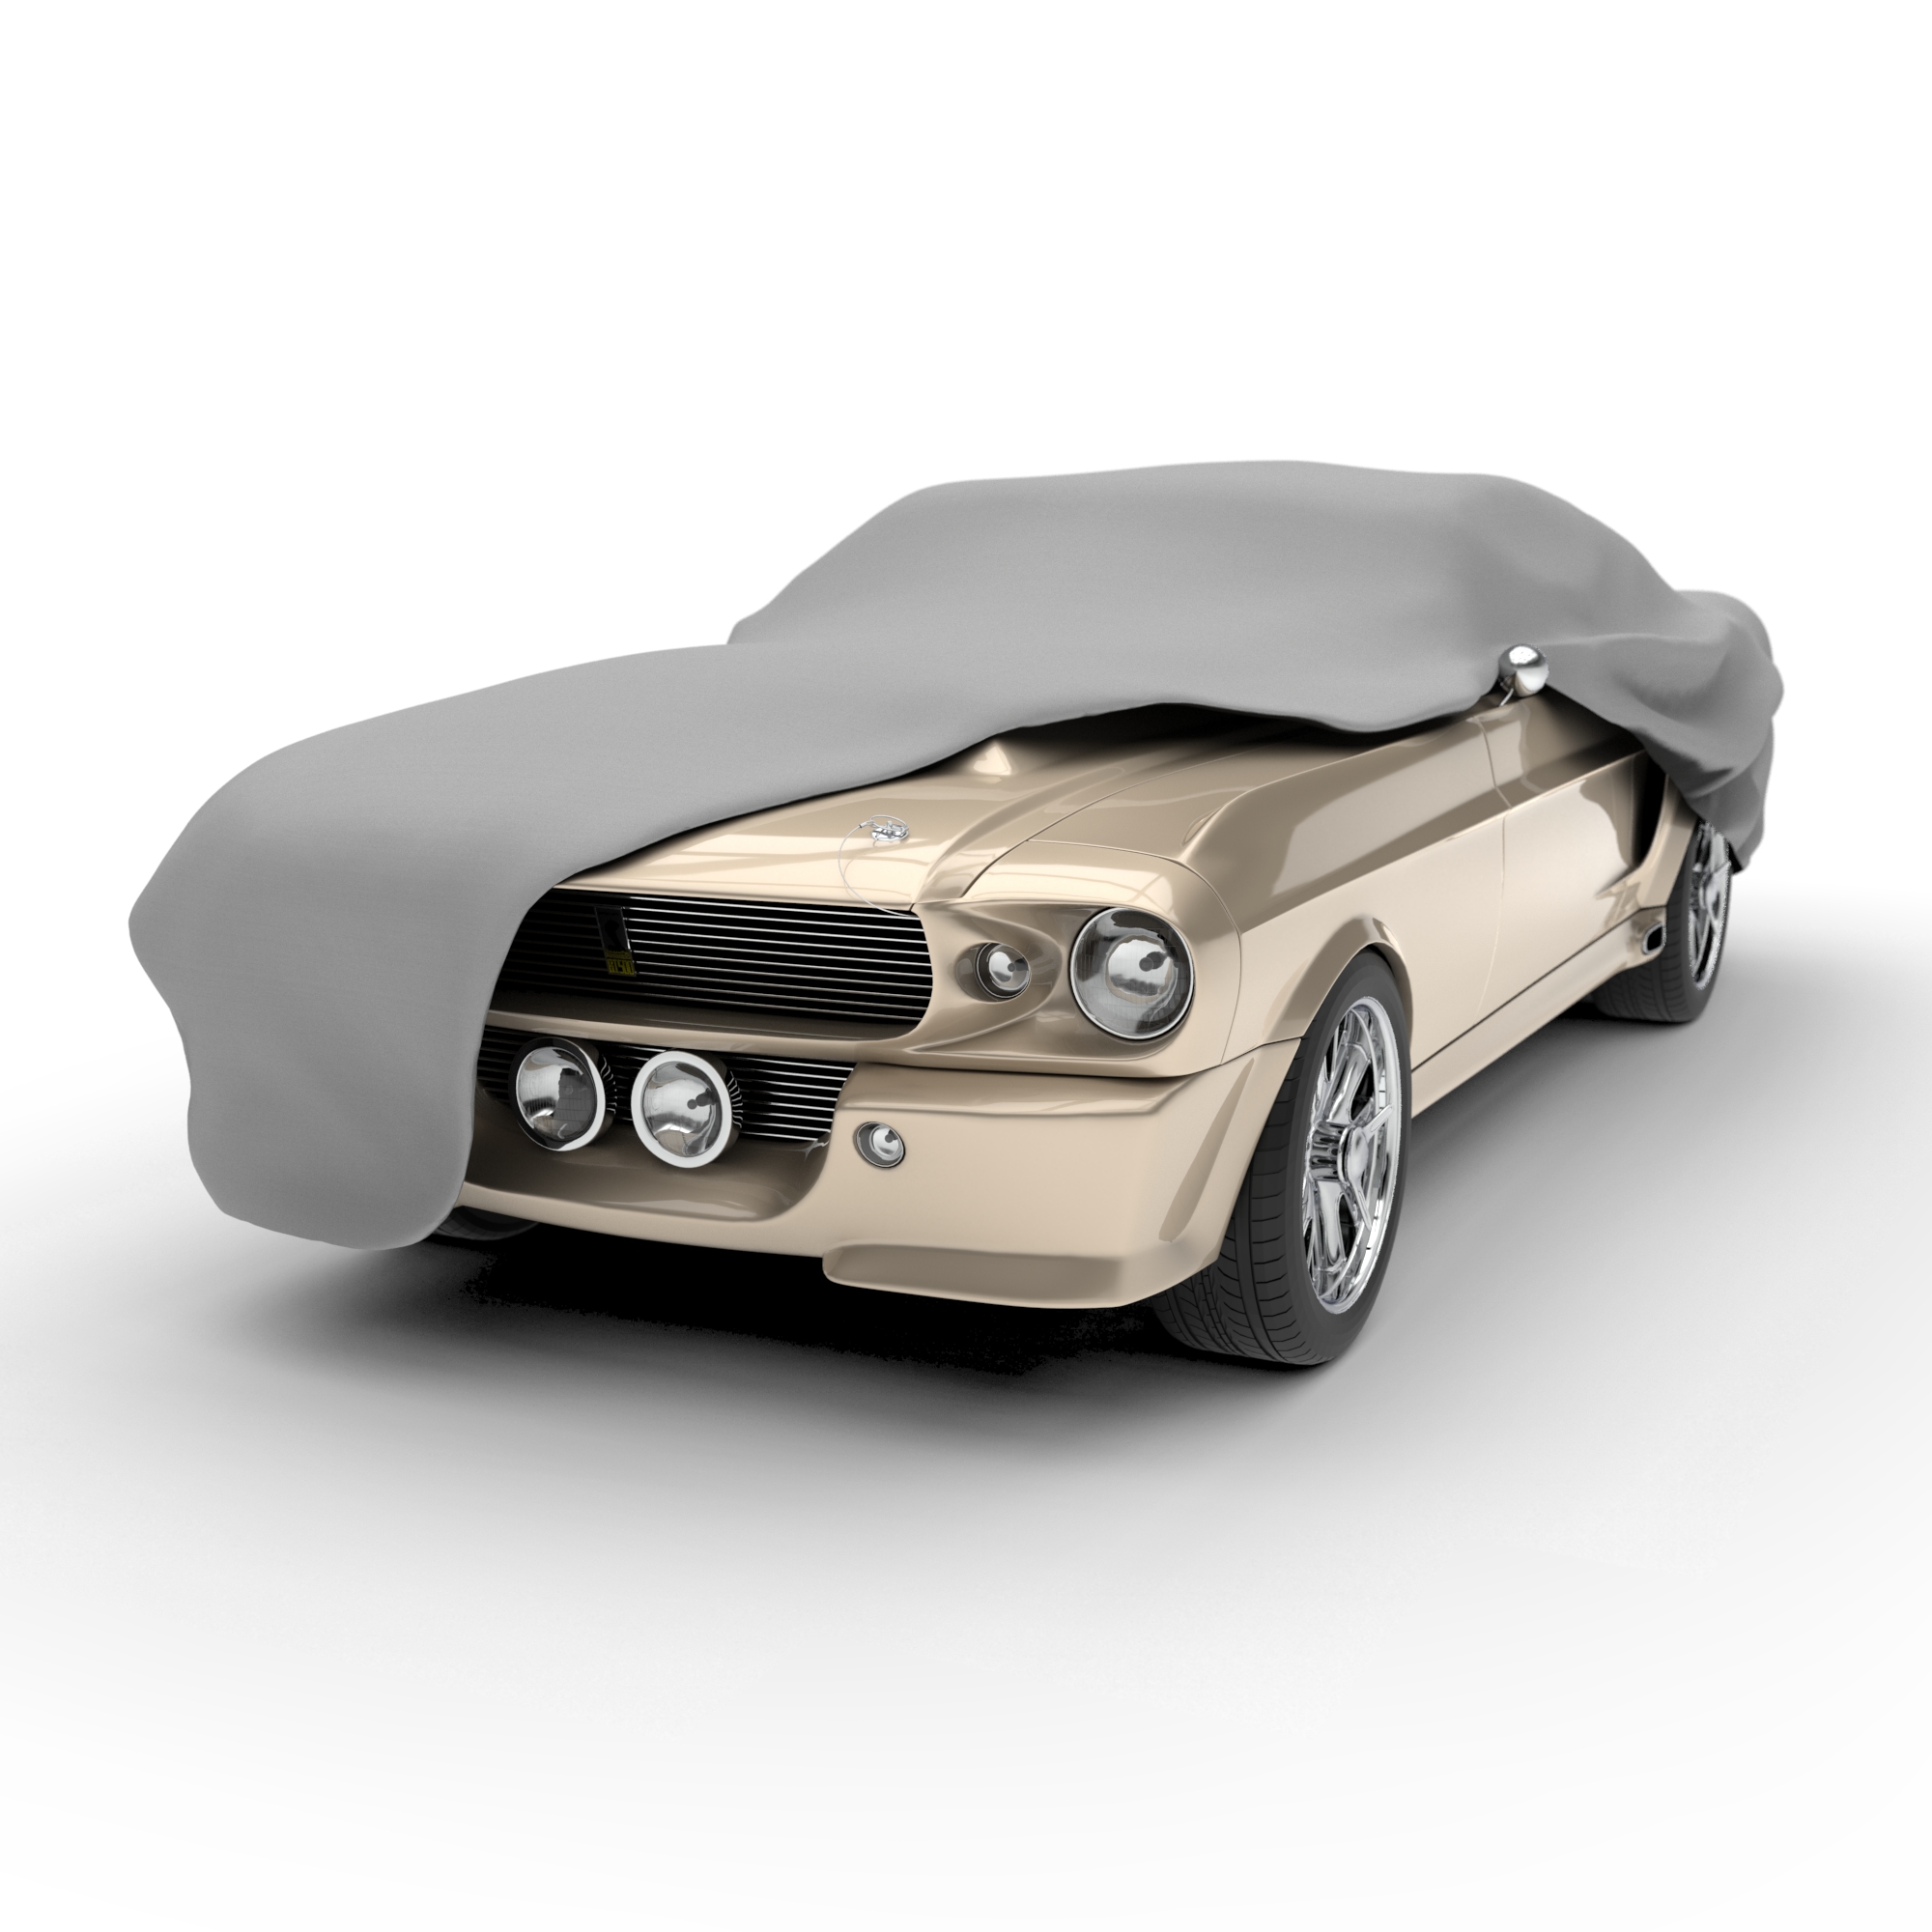 Budge Ultra Car Cover, Standard UV and Dirt Protection for Cars, Multiple Sizes - image 1 of 10